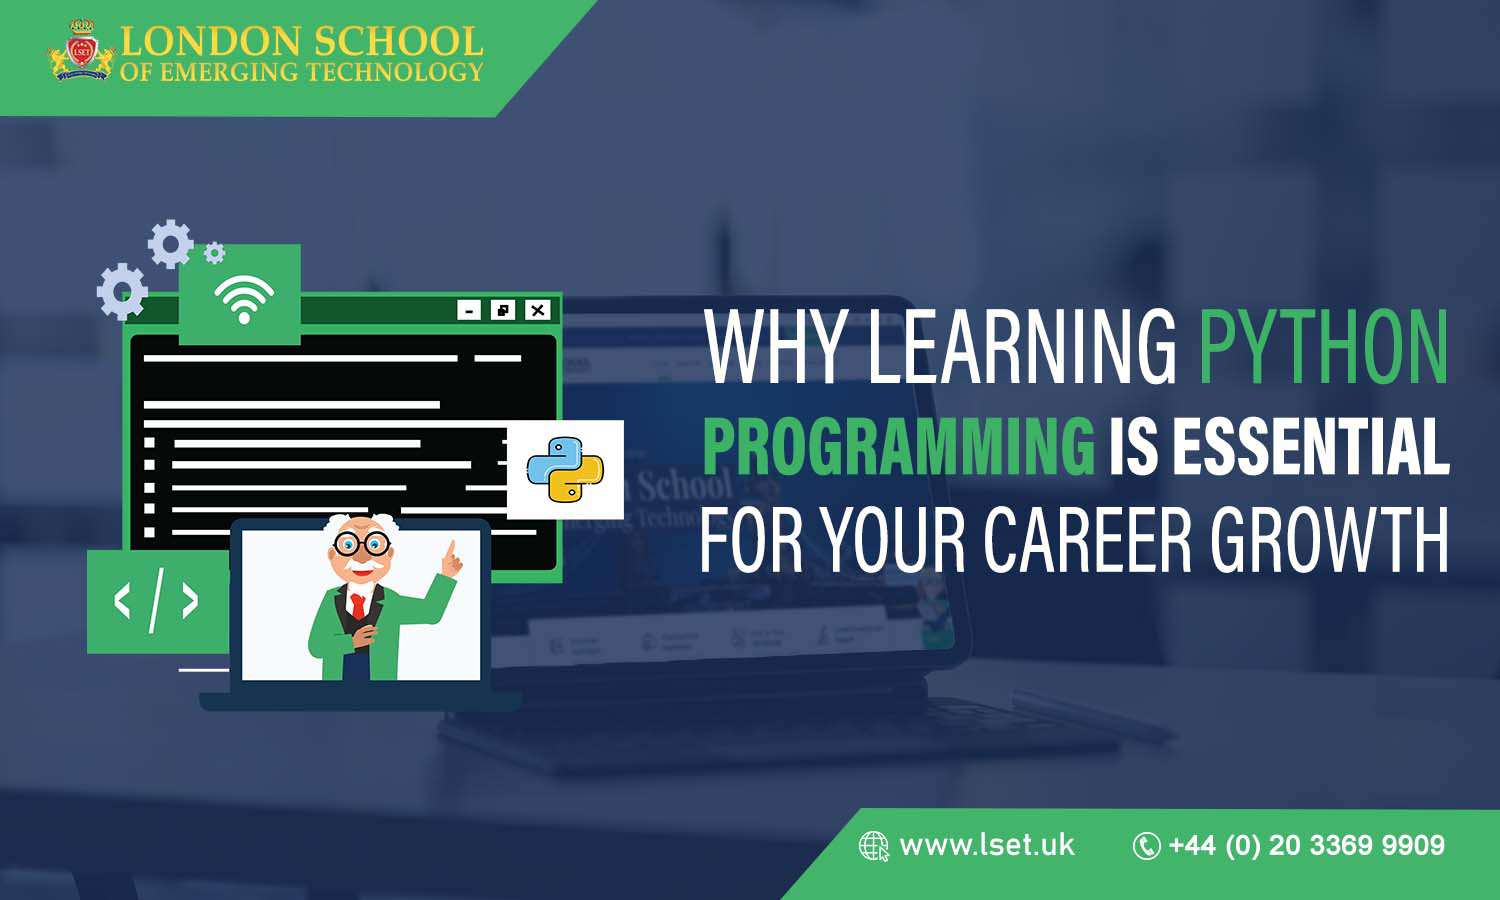 Why Learning Python Programming is Essential for Your Career Growth